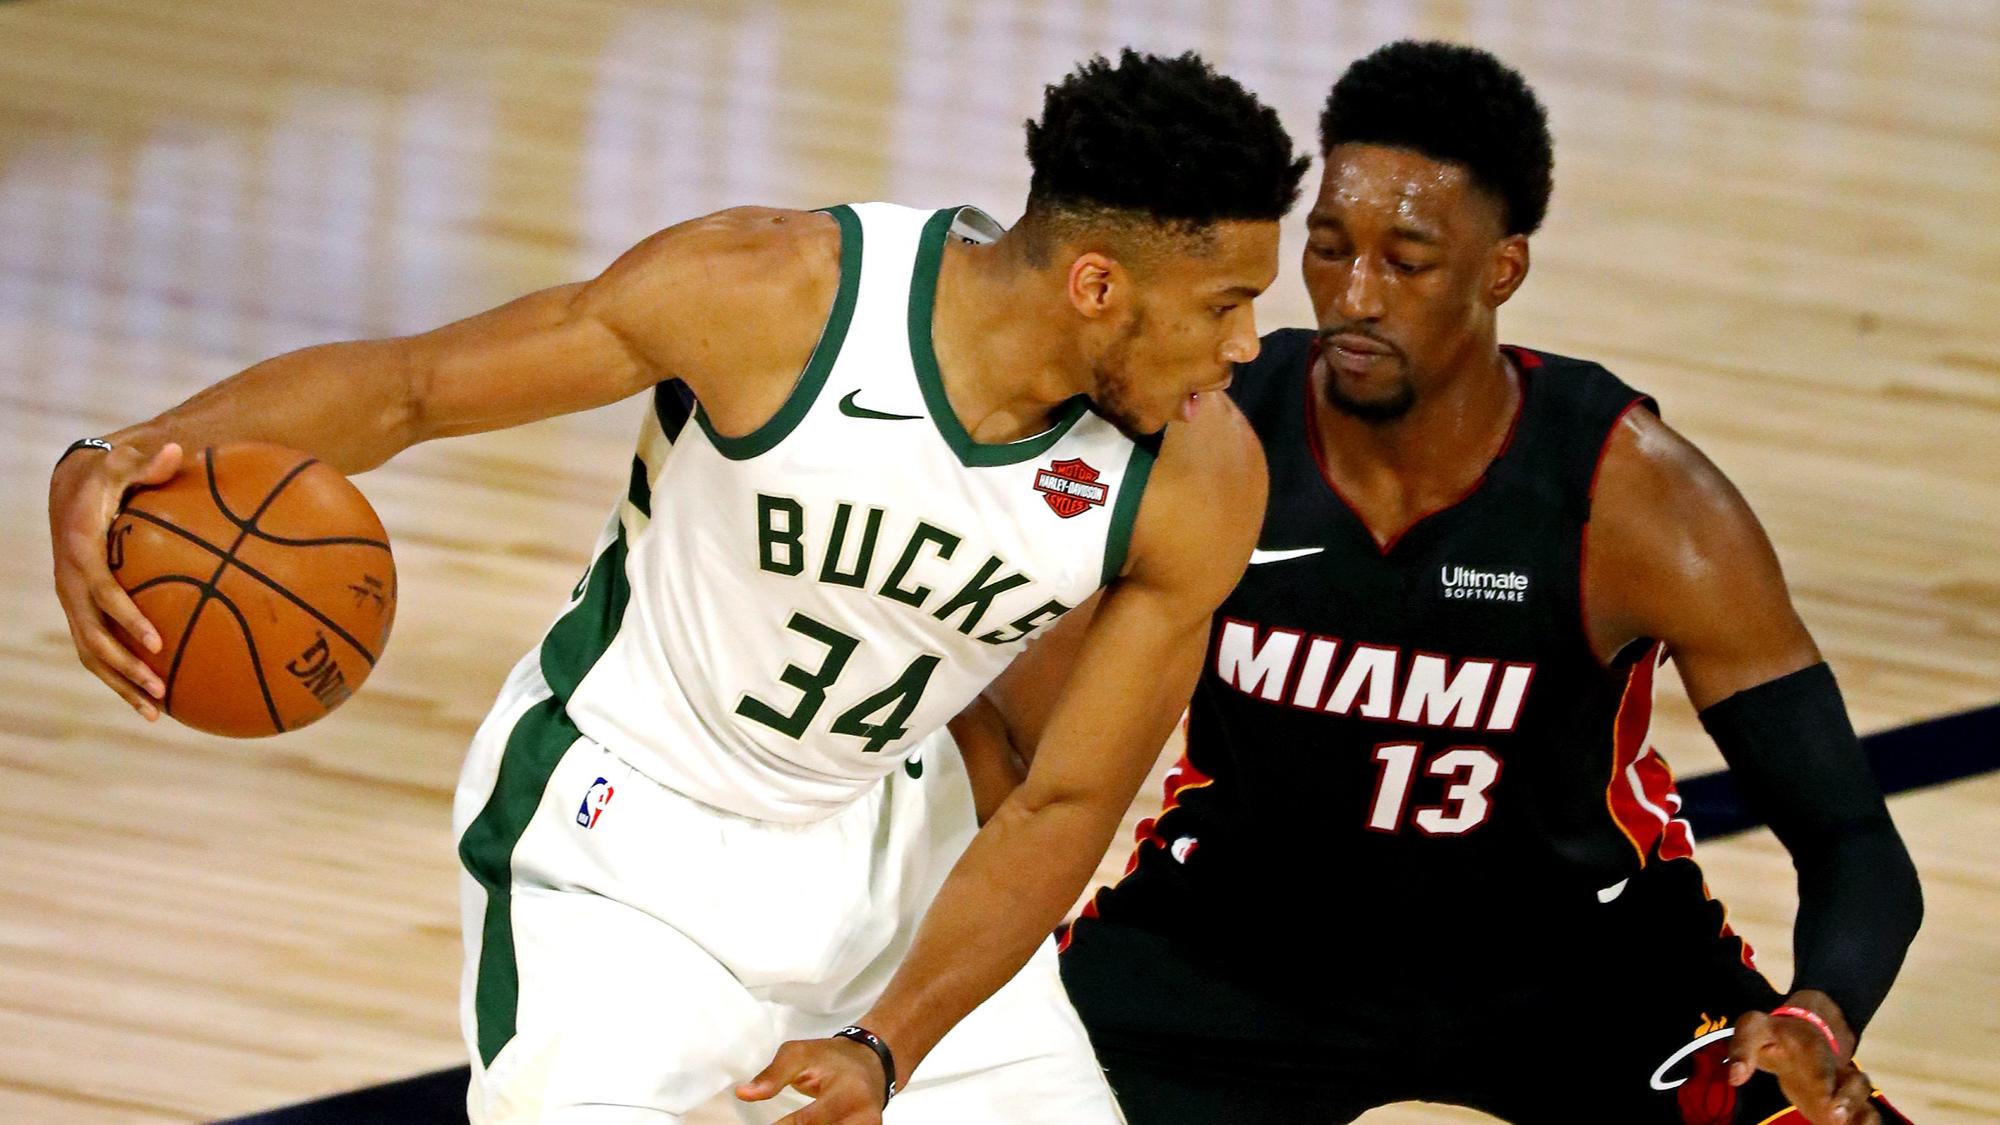 Sep 4, 2020; Lake Buena Vista, Florida, USA; Milwaukee Bucks forward Giannis Antetokounmpo (34) handles the ball against Miami Heat forward Bam Adebayo (13) during the first quarter in game three of the second round of the 2020 NBA Playoffs at ESPN Wide World of Sports Complex. Mandatory Credit: Kim Klement-USA TODAY Sports